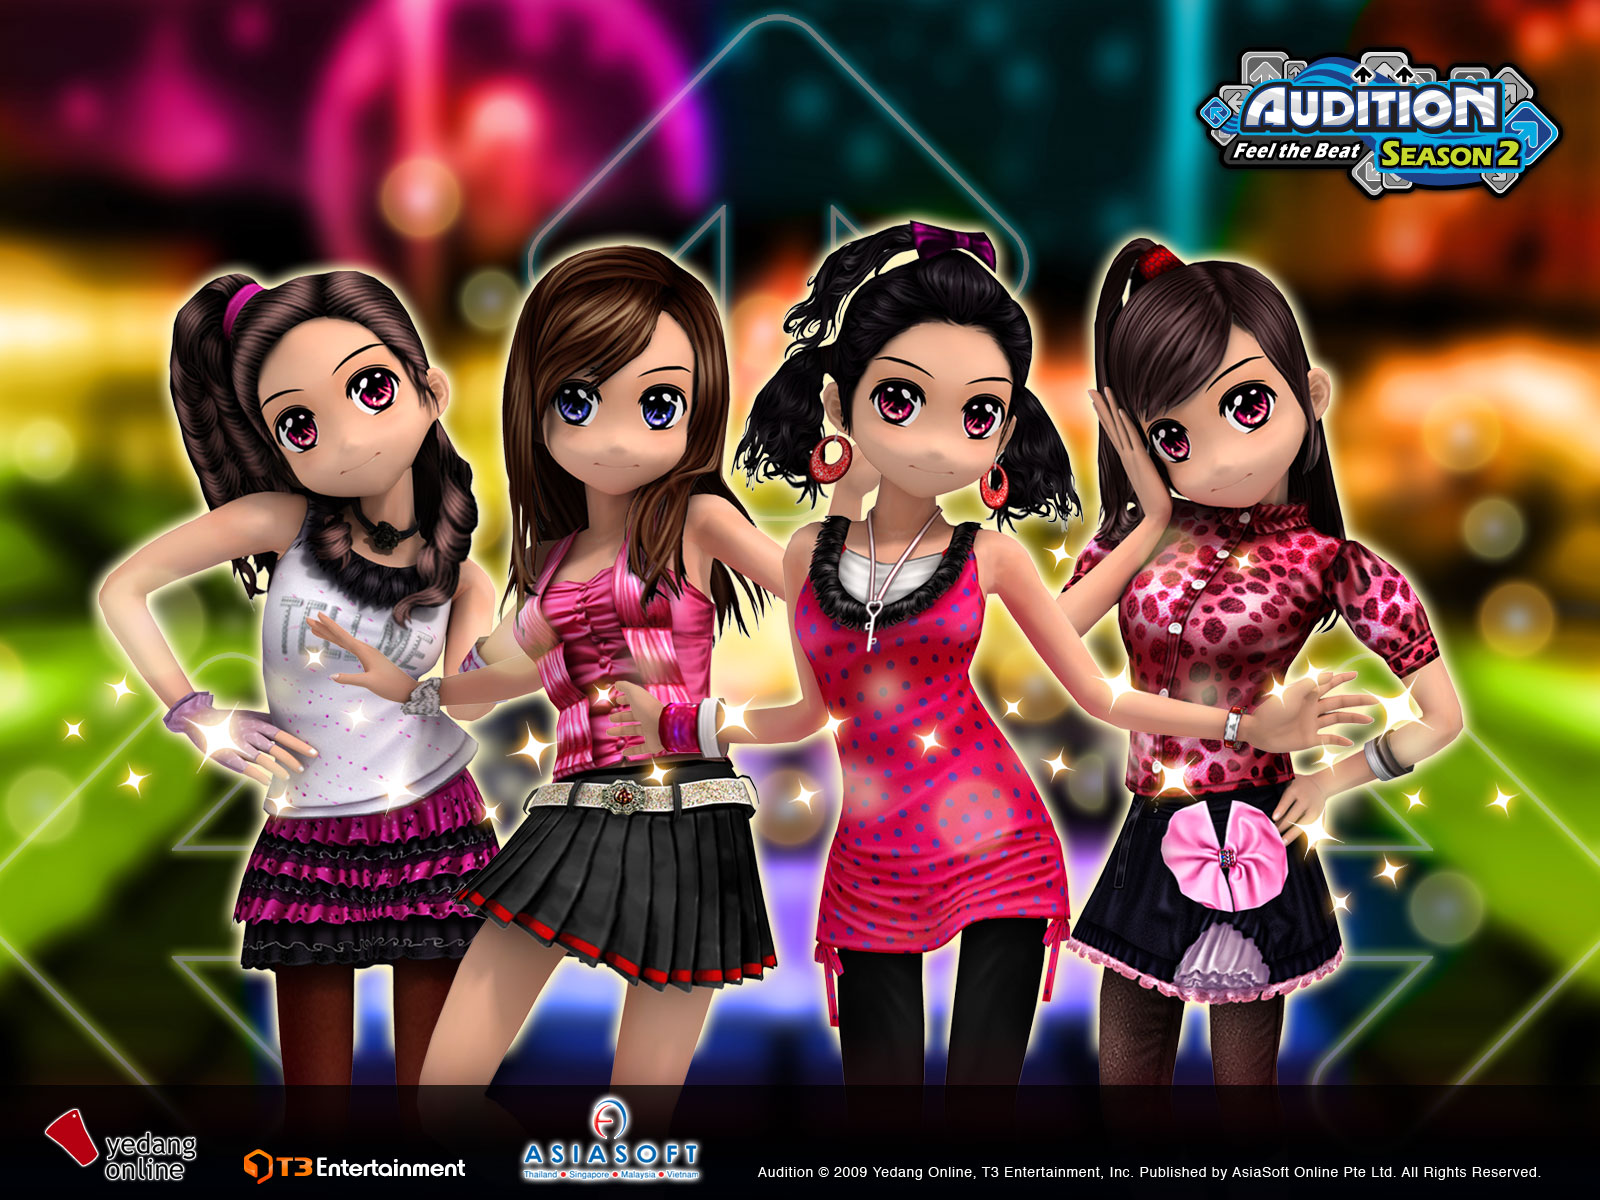 Continue reading '[Wallpaper] WG – Audition Online Game!'